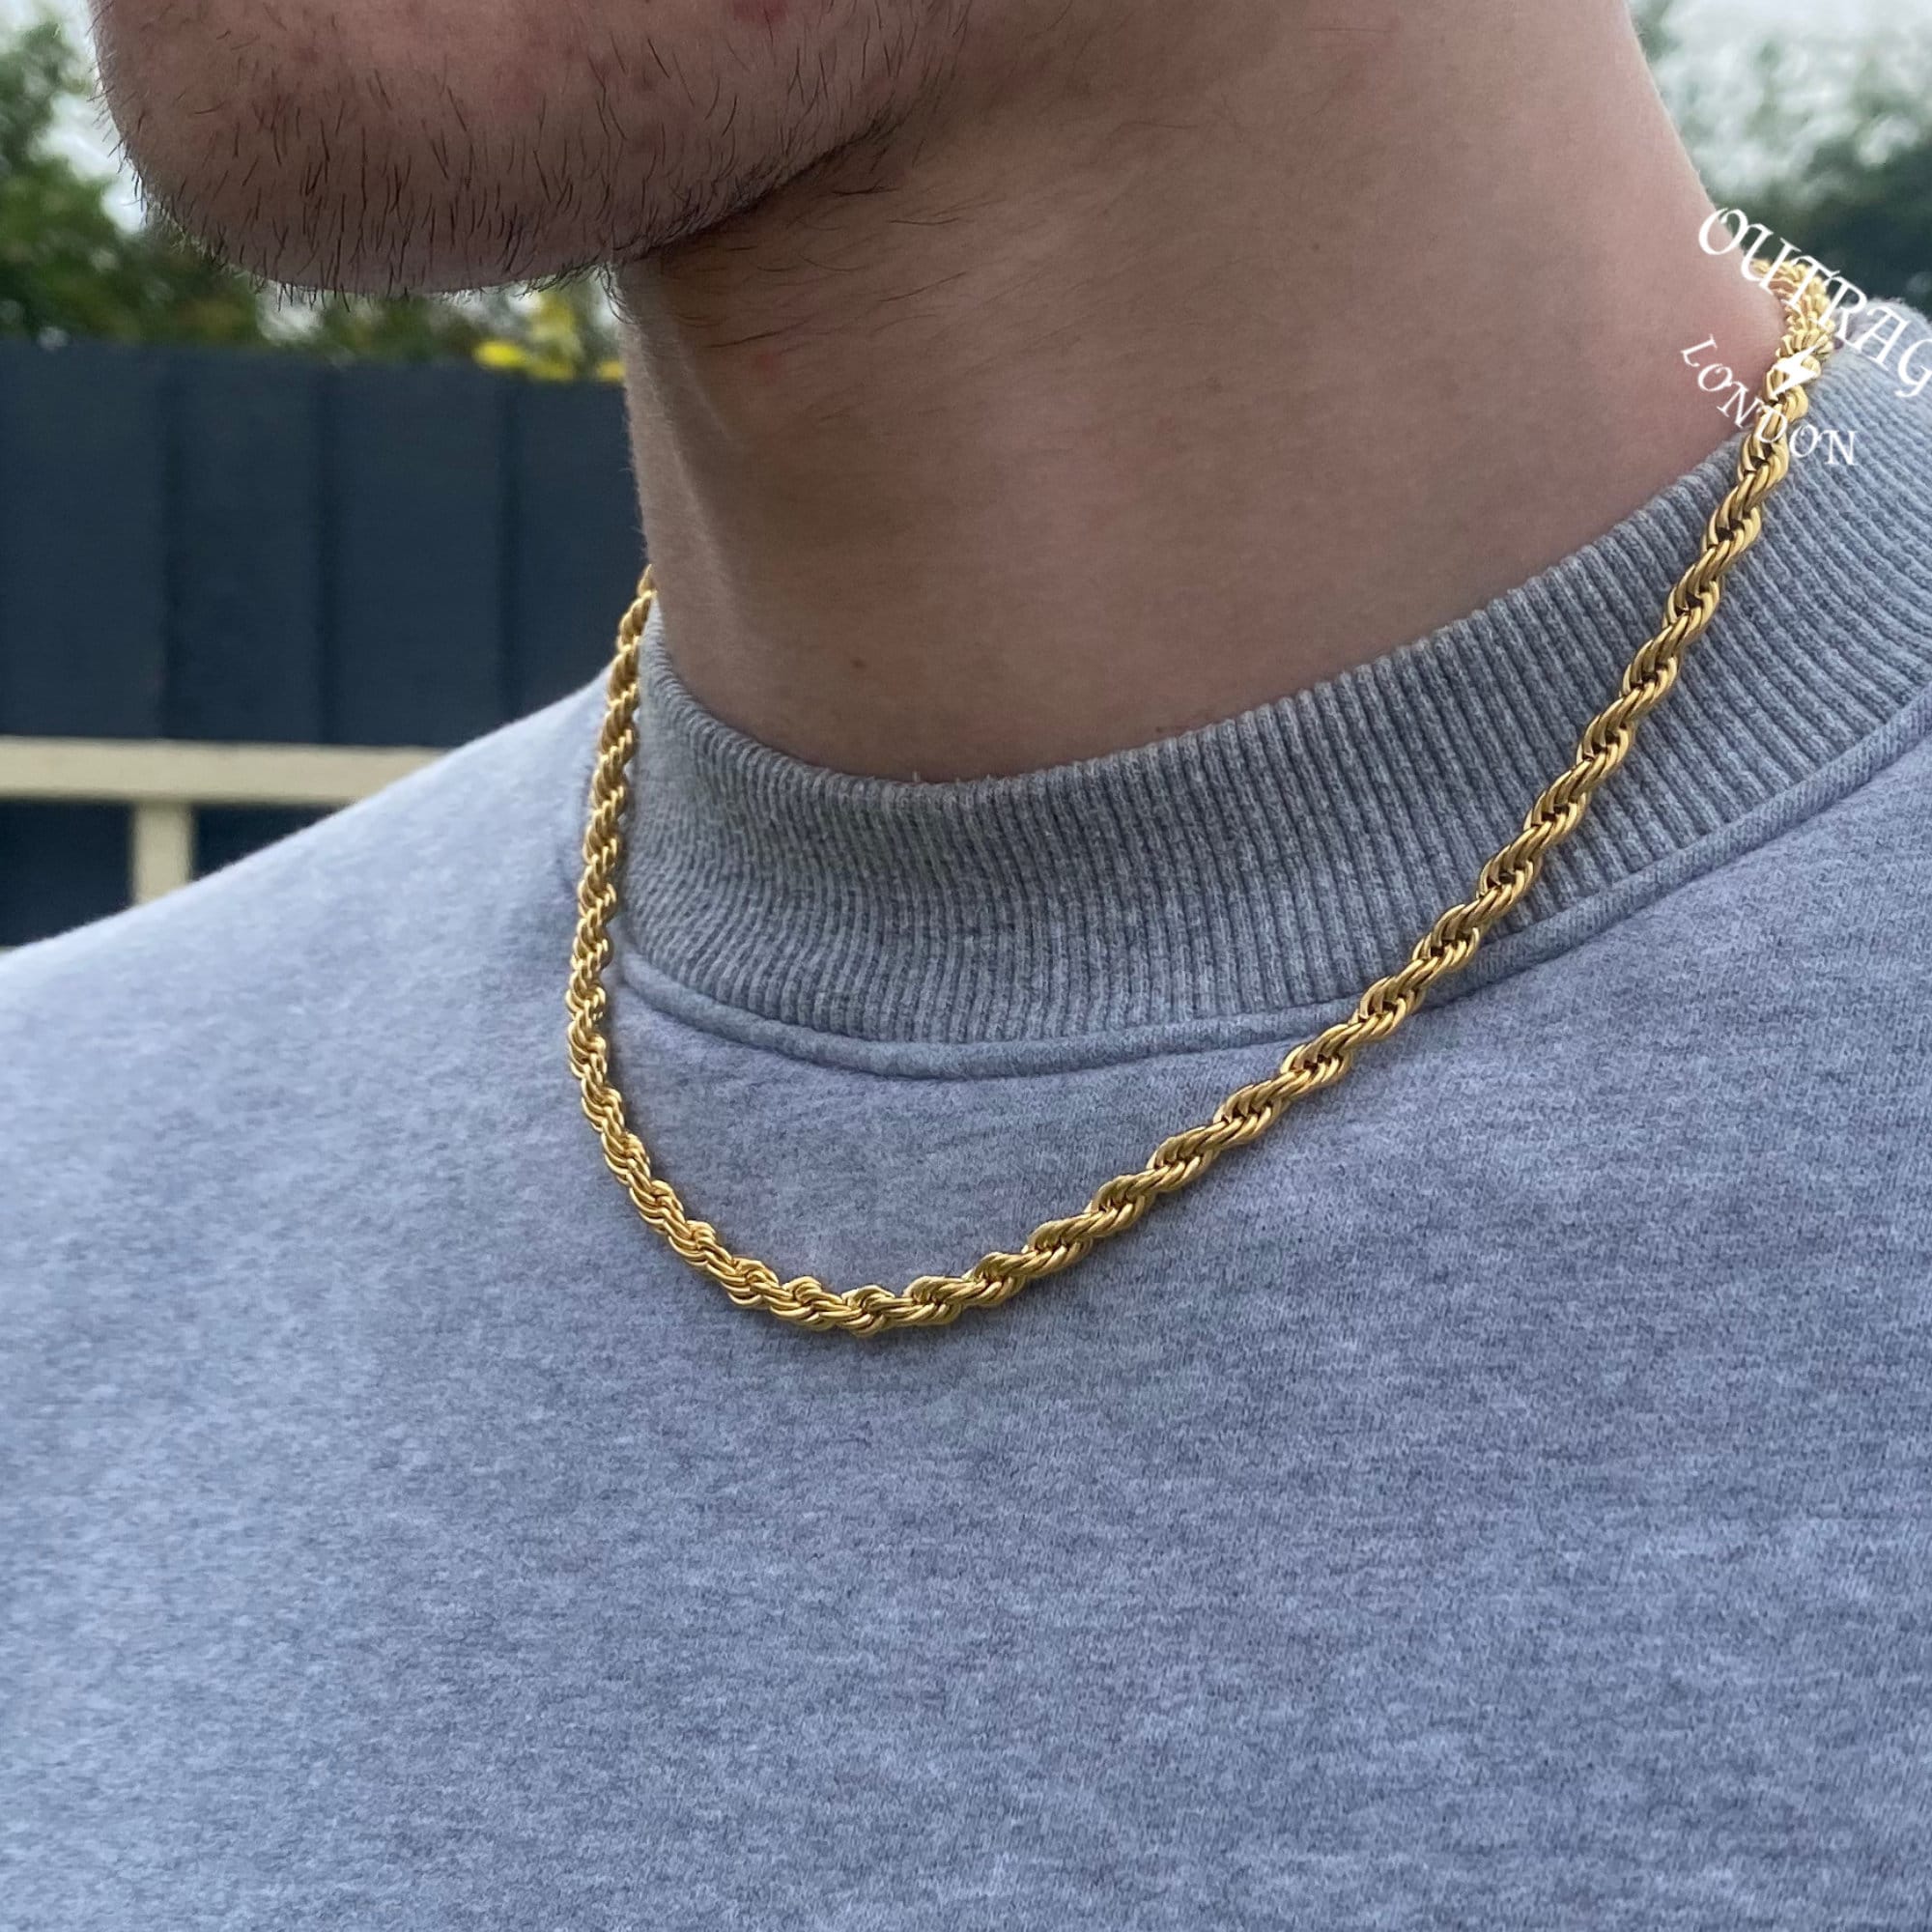 10 Pieces Stainless Steel Rope Chain Gold Color Wholesale 3mm 5mm Rope Necklace for Men or Women